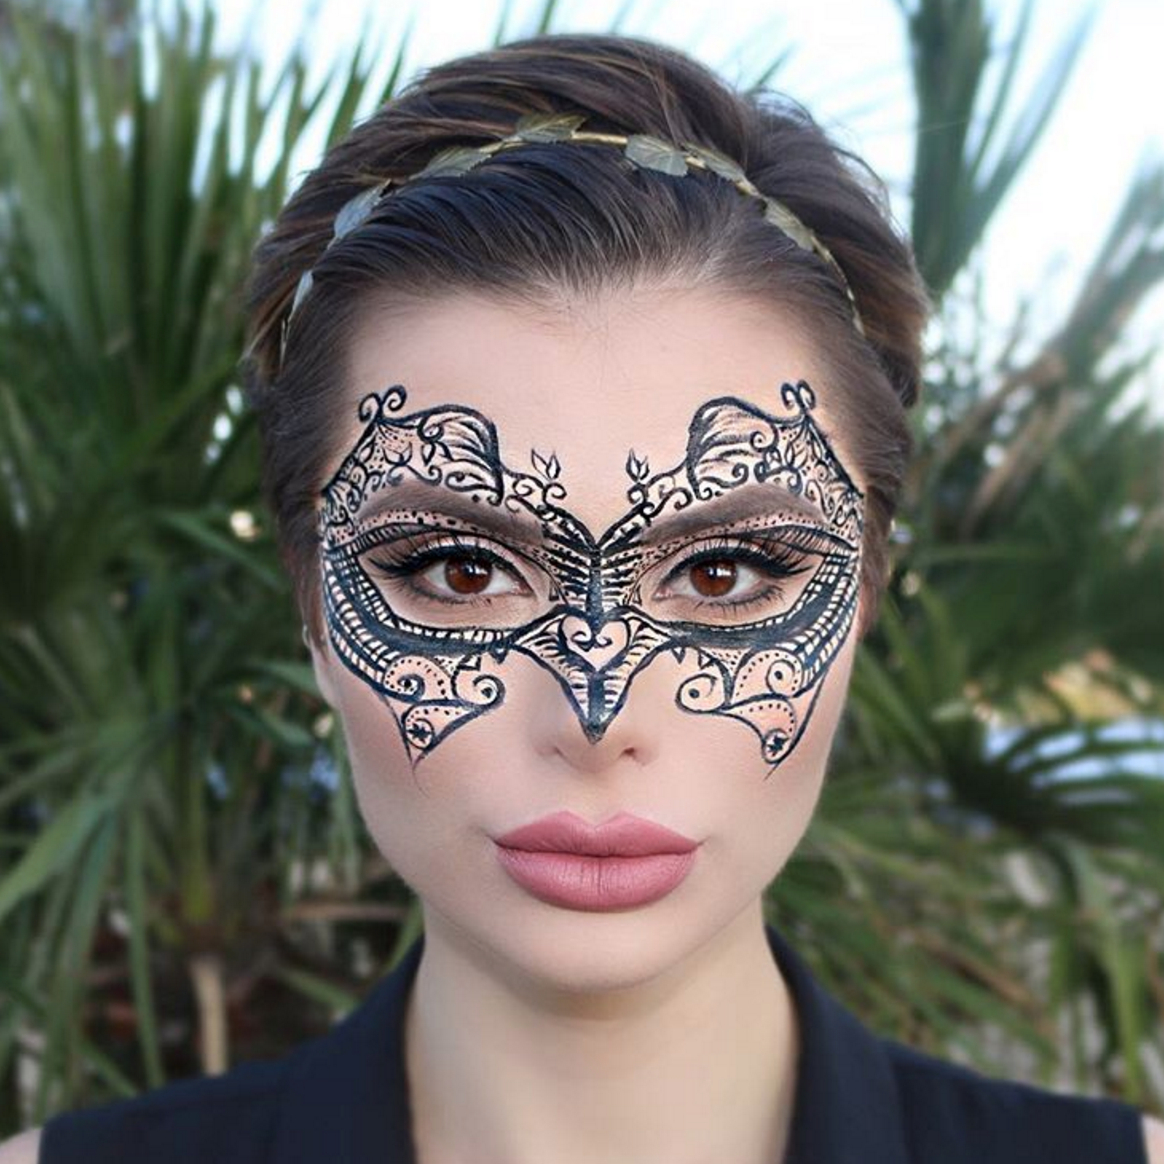 Cat Eye Makeup For Halloween 5 Easy Halloween Makeup Ideas You Can Do With Only Eyeliner Glamour